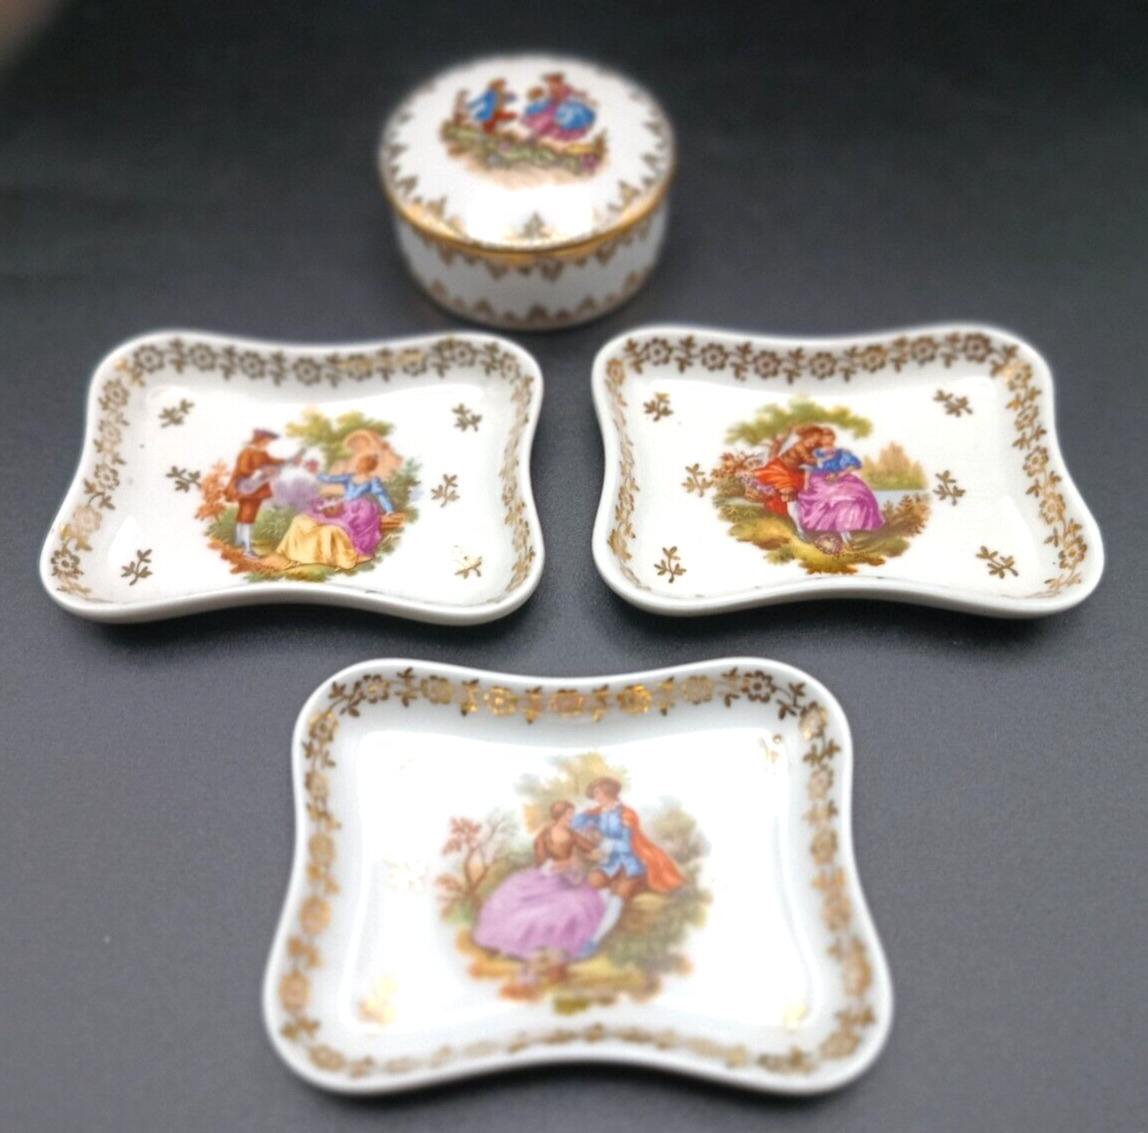 A FRENCH LIMOGES SET OF (3) SMALL JEWELRY PIN TRAY DISHES +(1) TRINKET BOX, vg